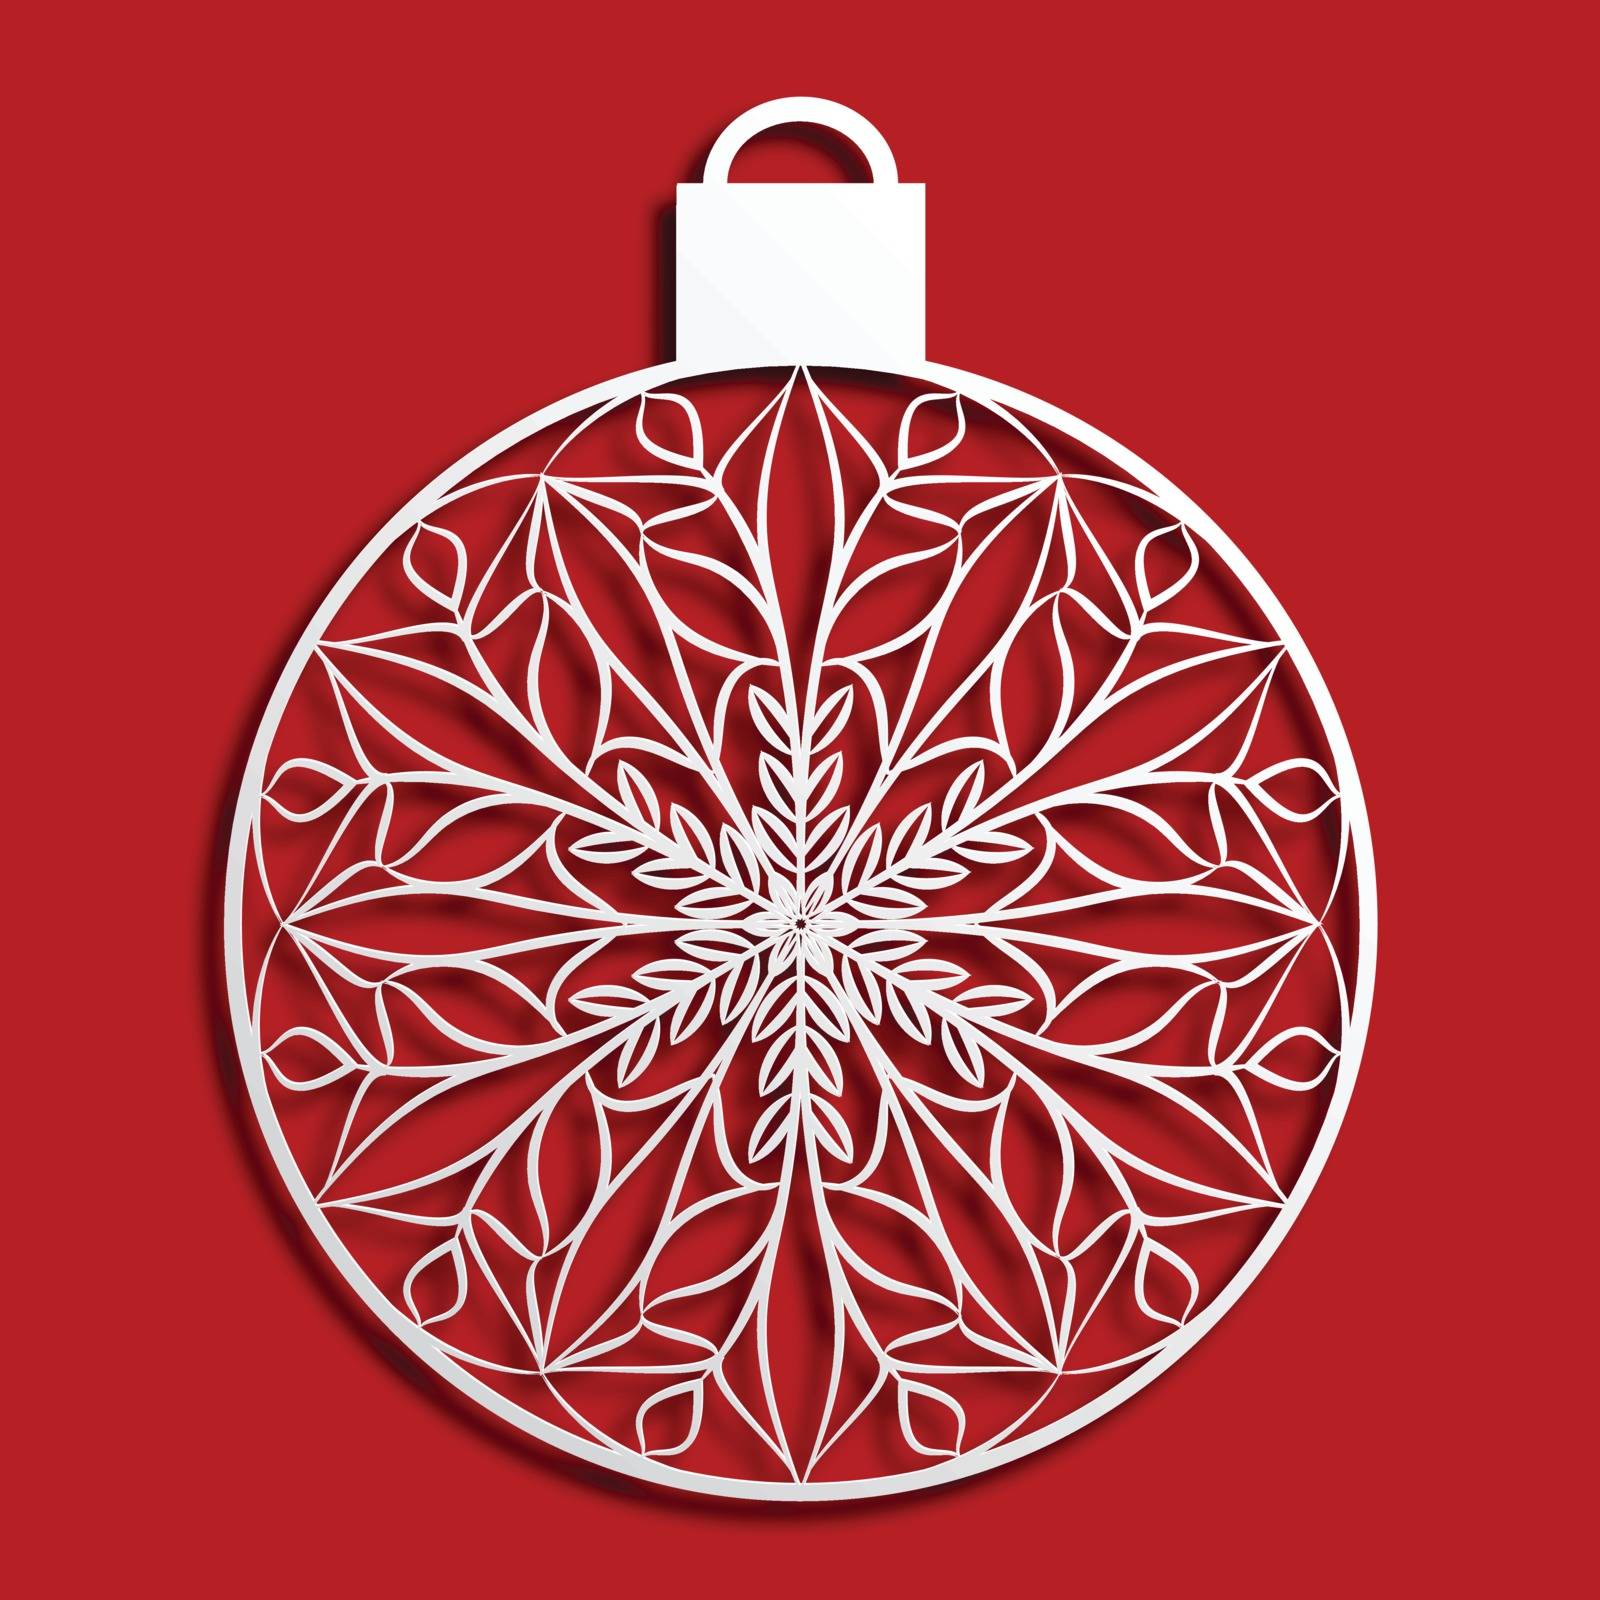 Christmas tree ornament in paper cut style, with snowflake pattern. White festive bauble with realistic shadow, on red isolated background. 3D illustration.